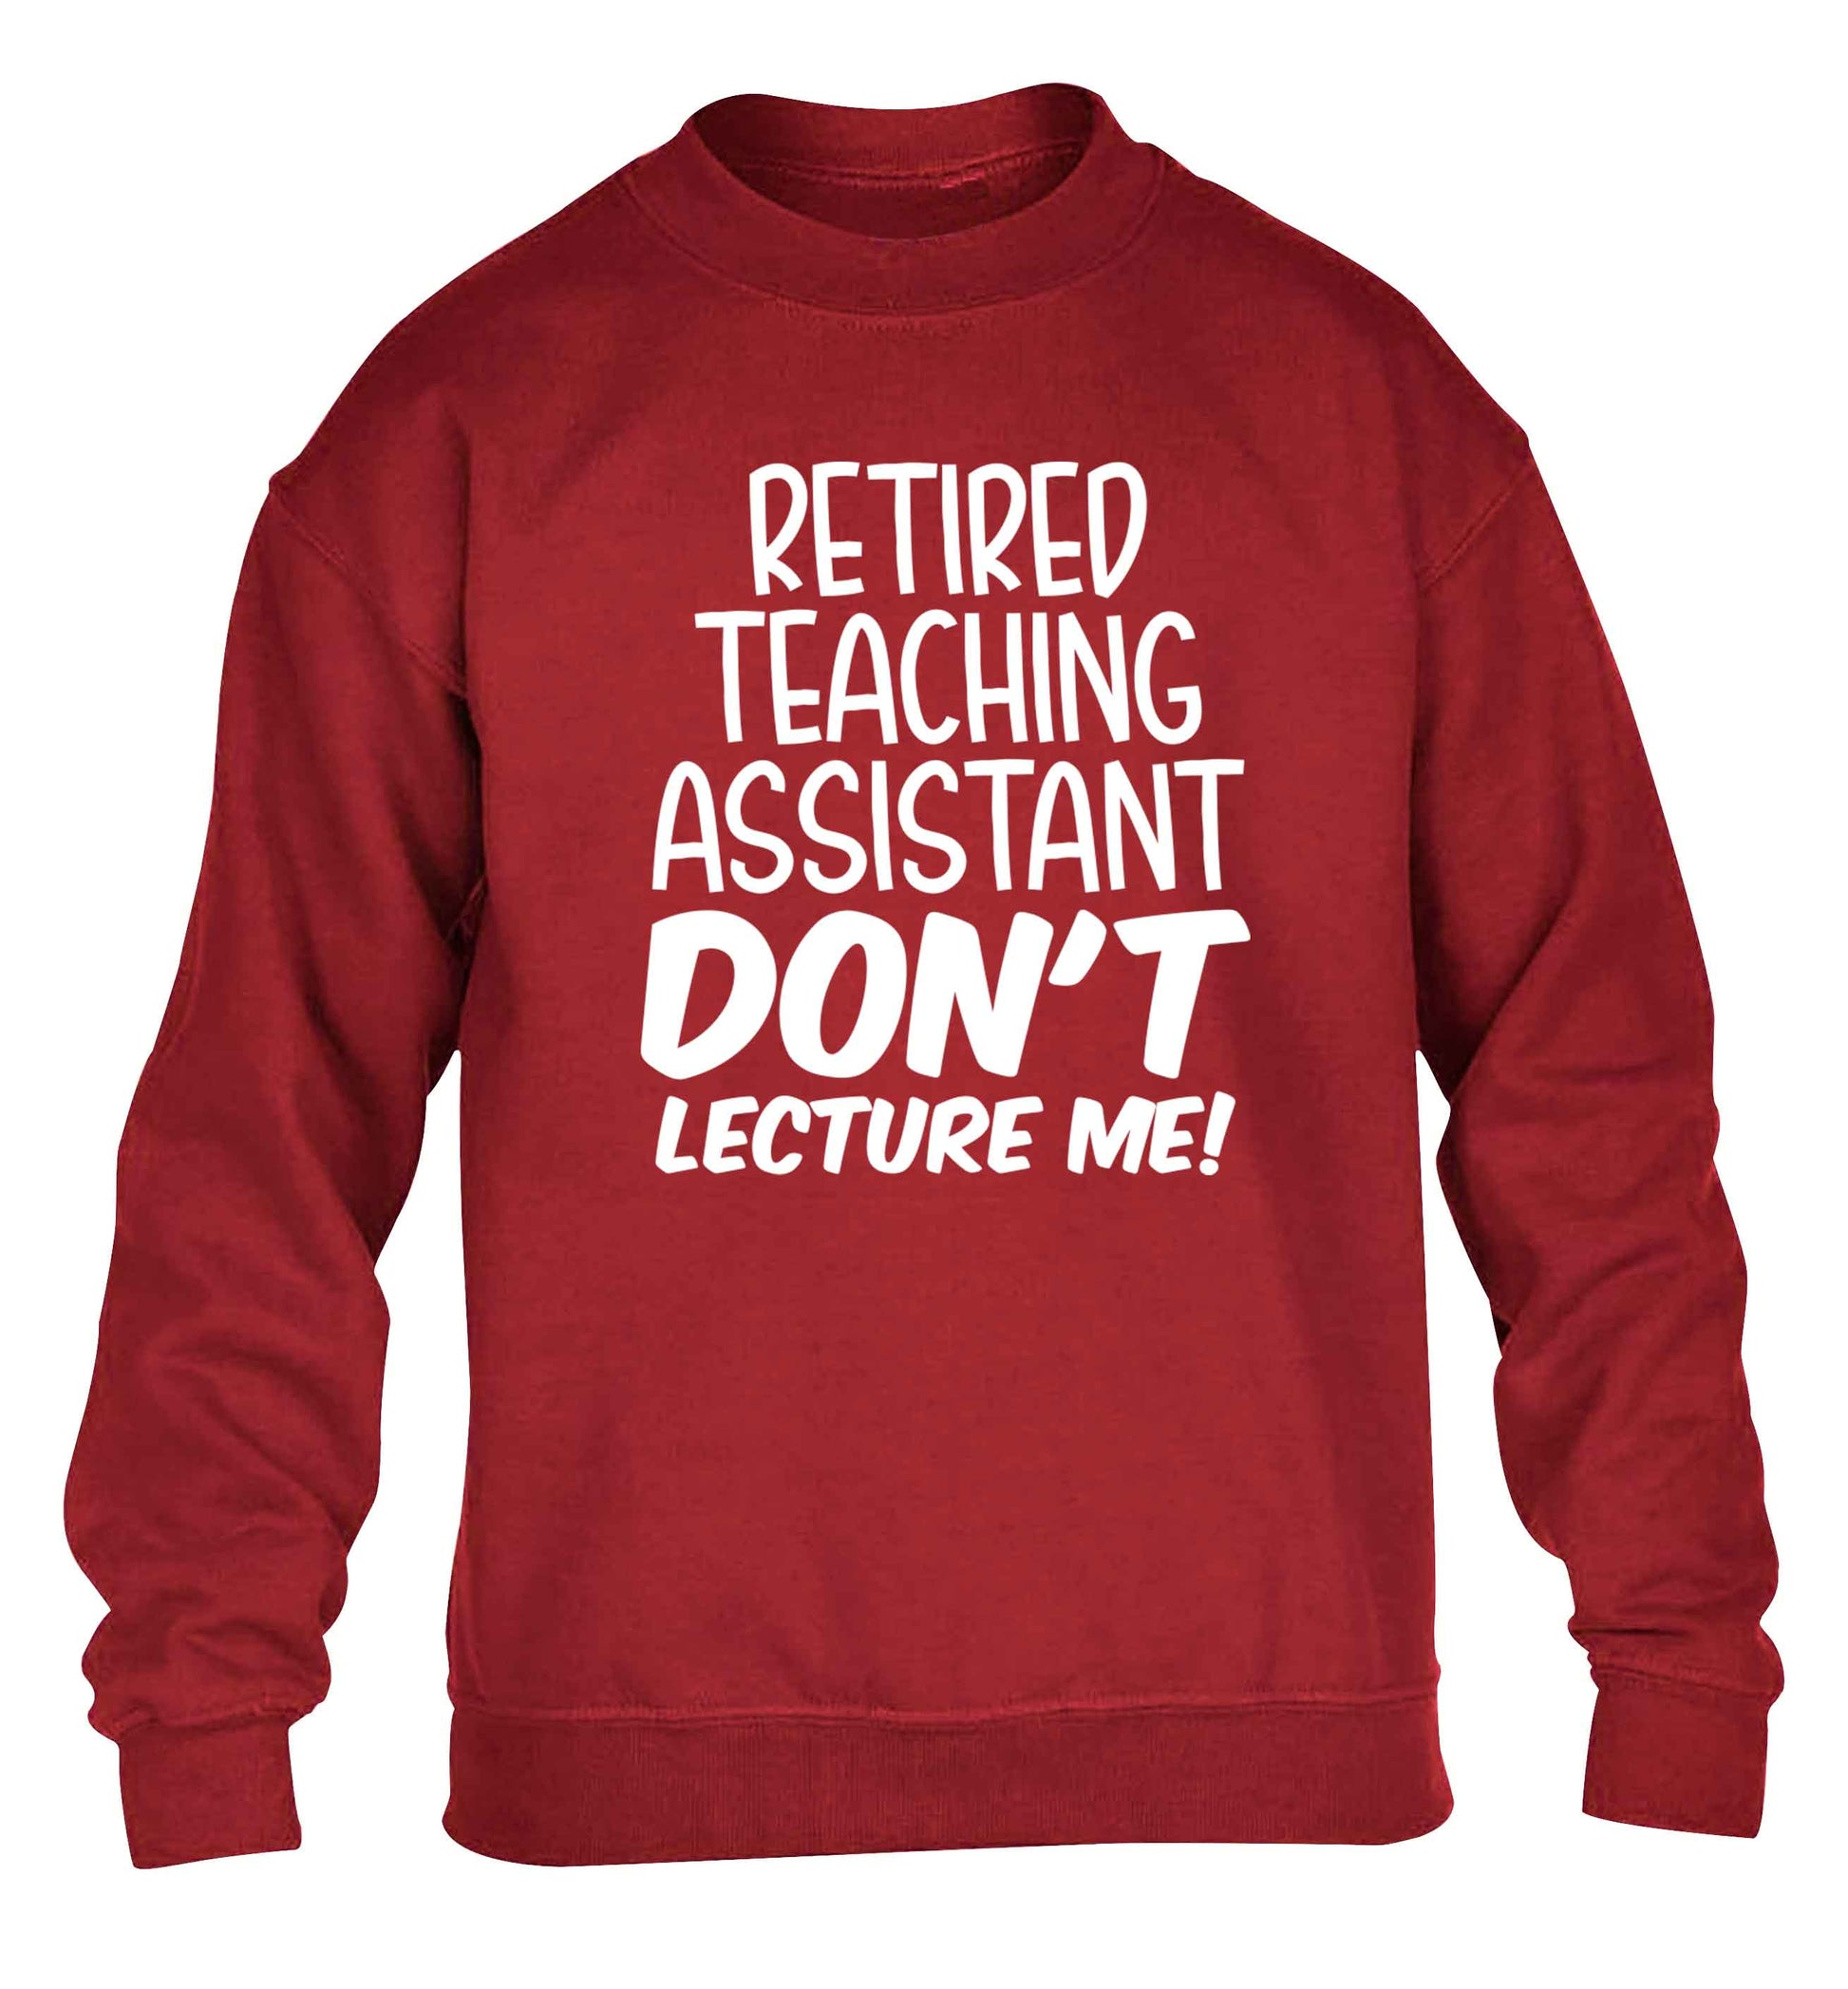 Retired teaching assistant don't lecture me children's grey sweater 12-13 Years